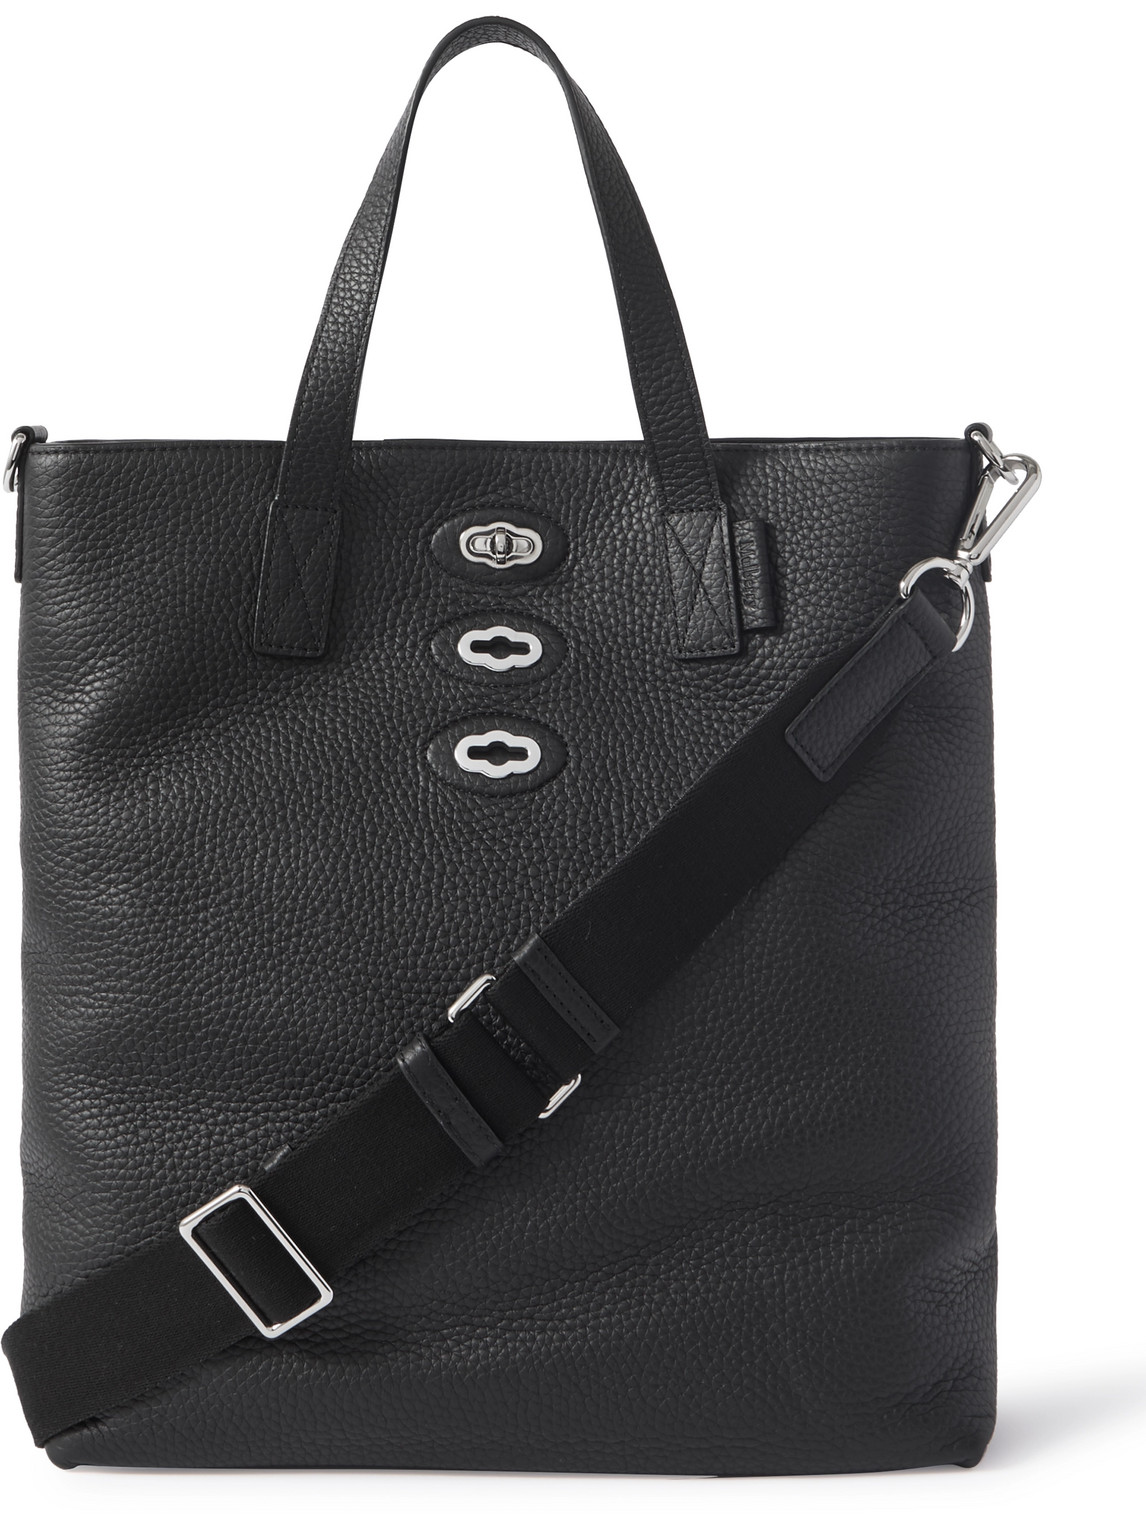 MULBERRY BRYN SMALL FULL-GRAIN LEATHER TOTE BAG